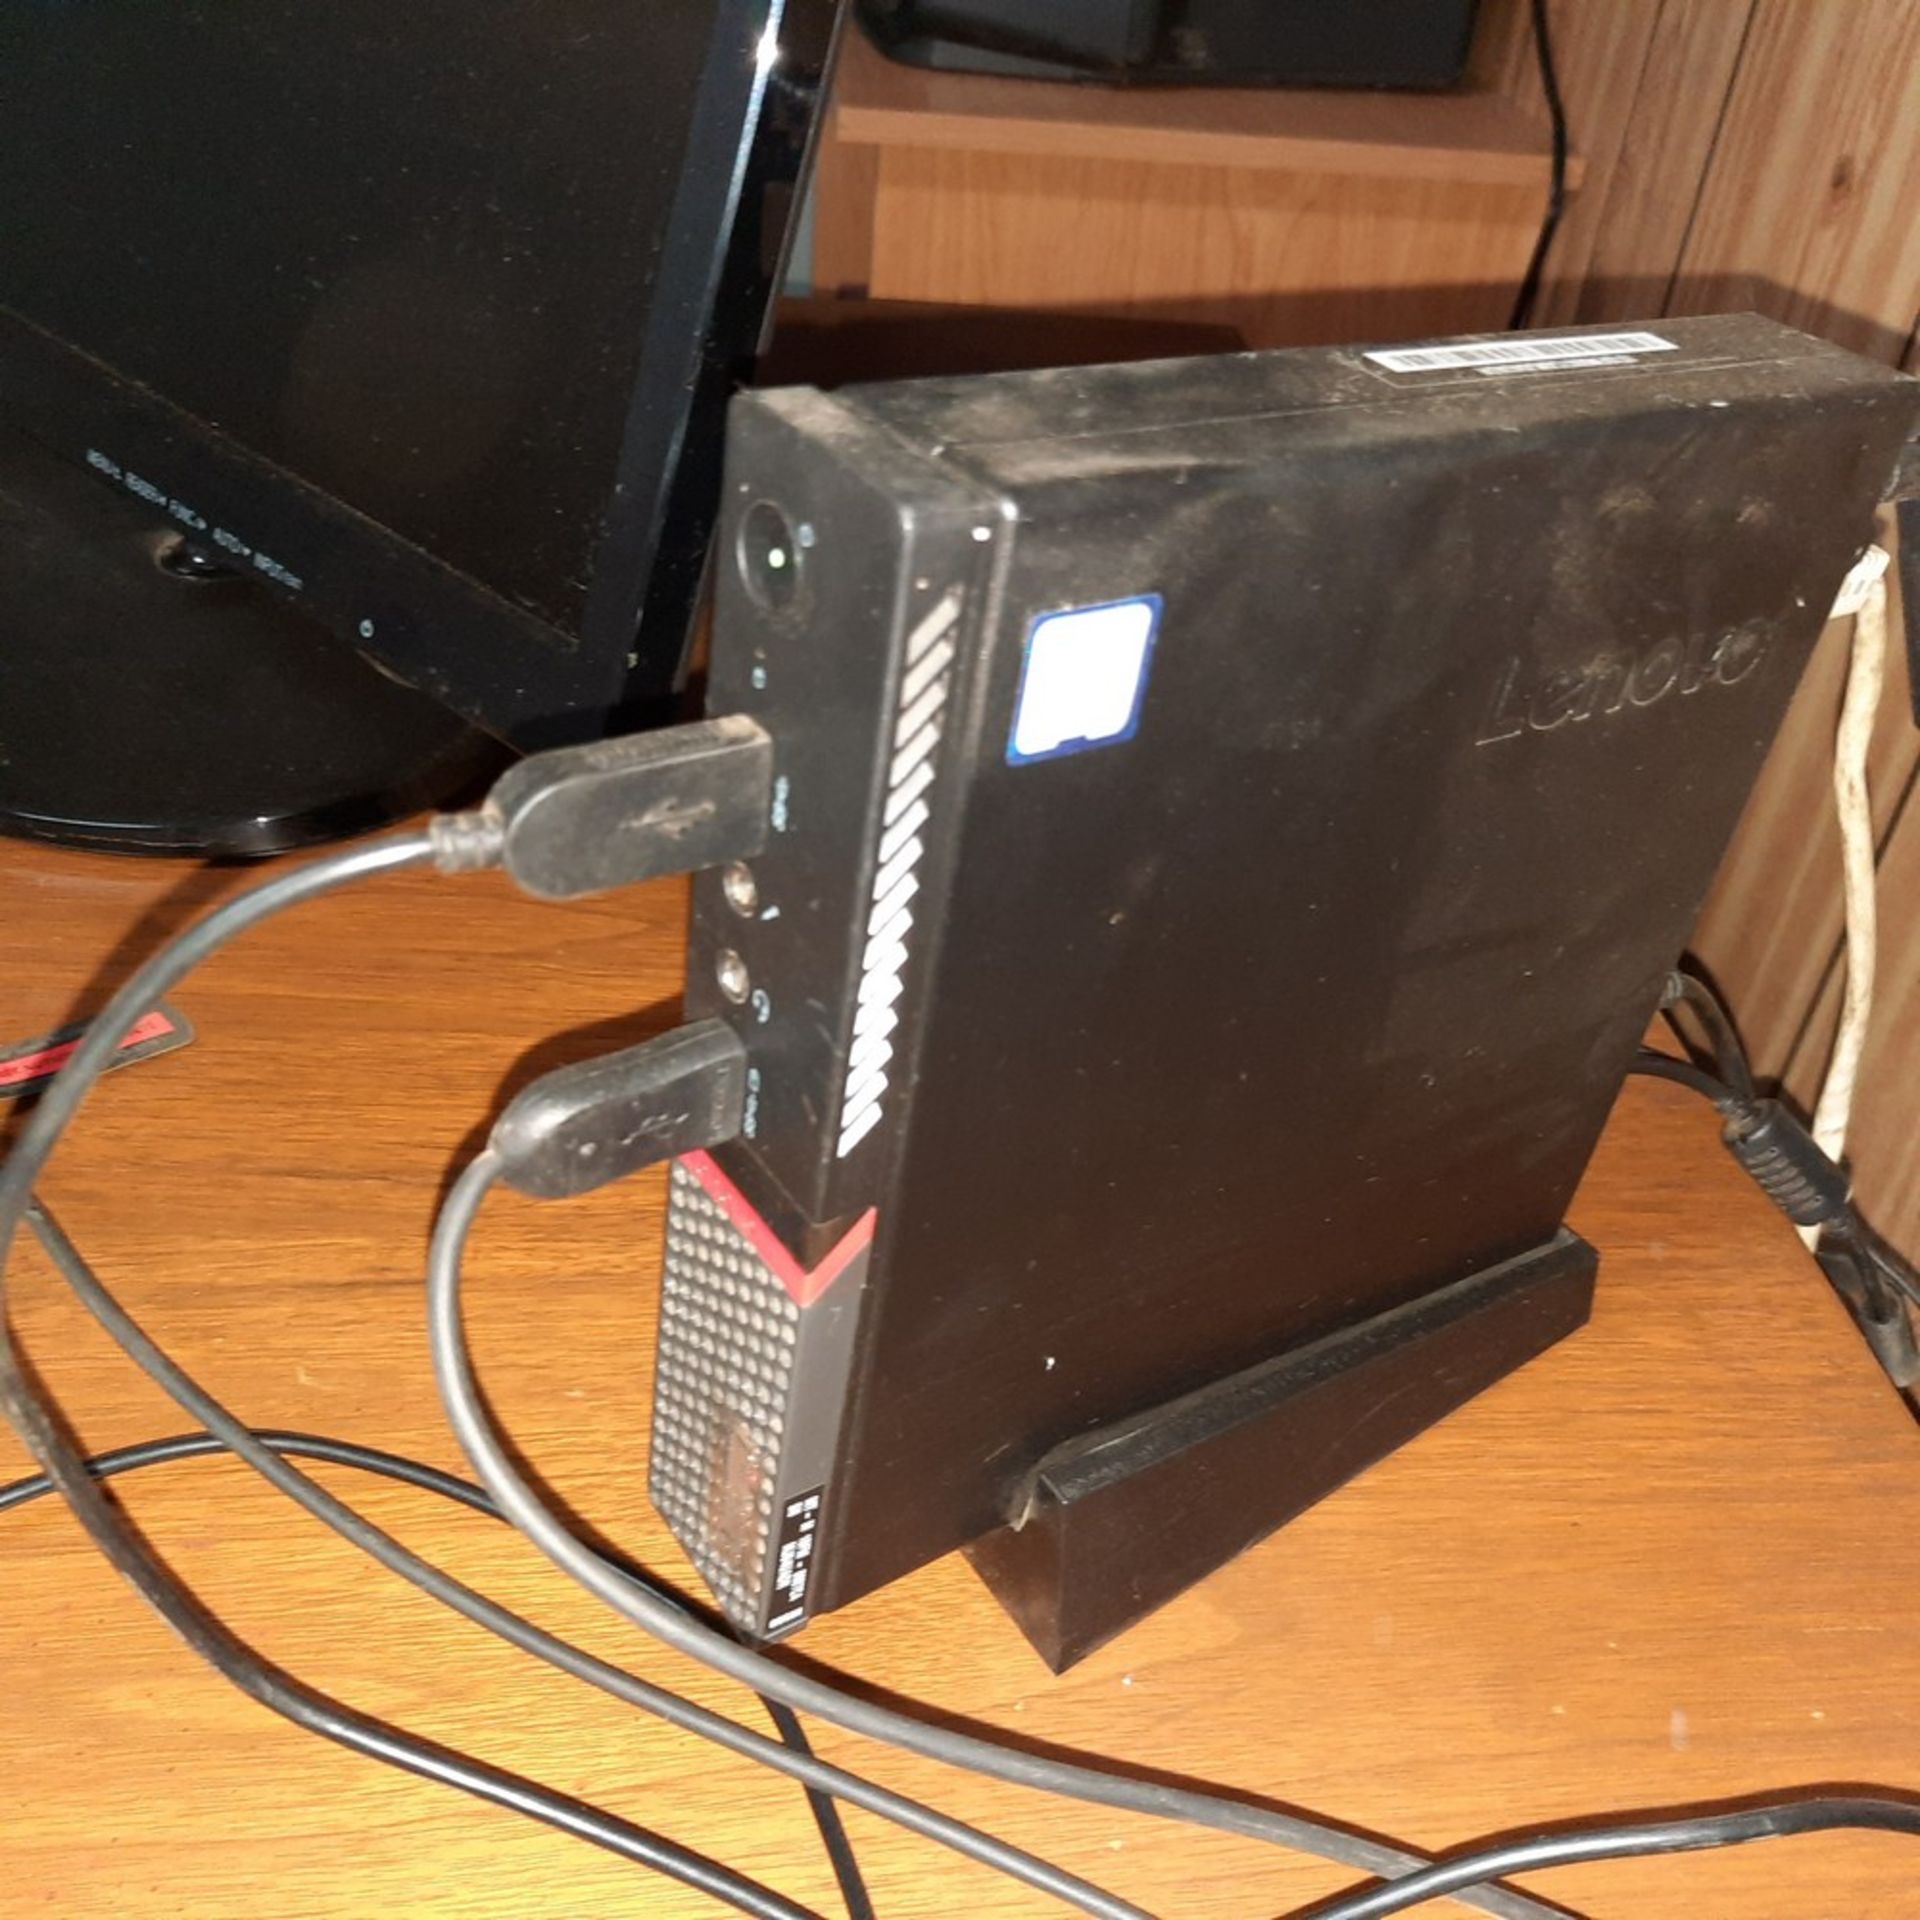 LENOVO ThinkCentre M900, Monitor, Keyboard & Mouse - Image 2 of 3